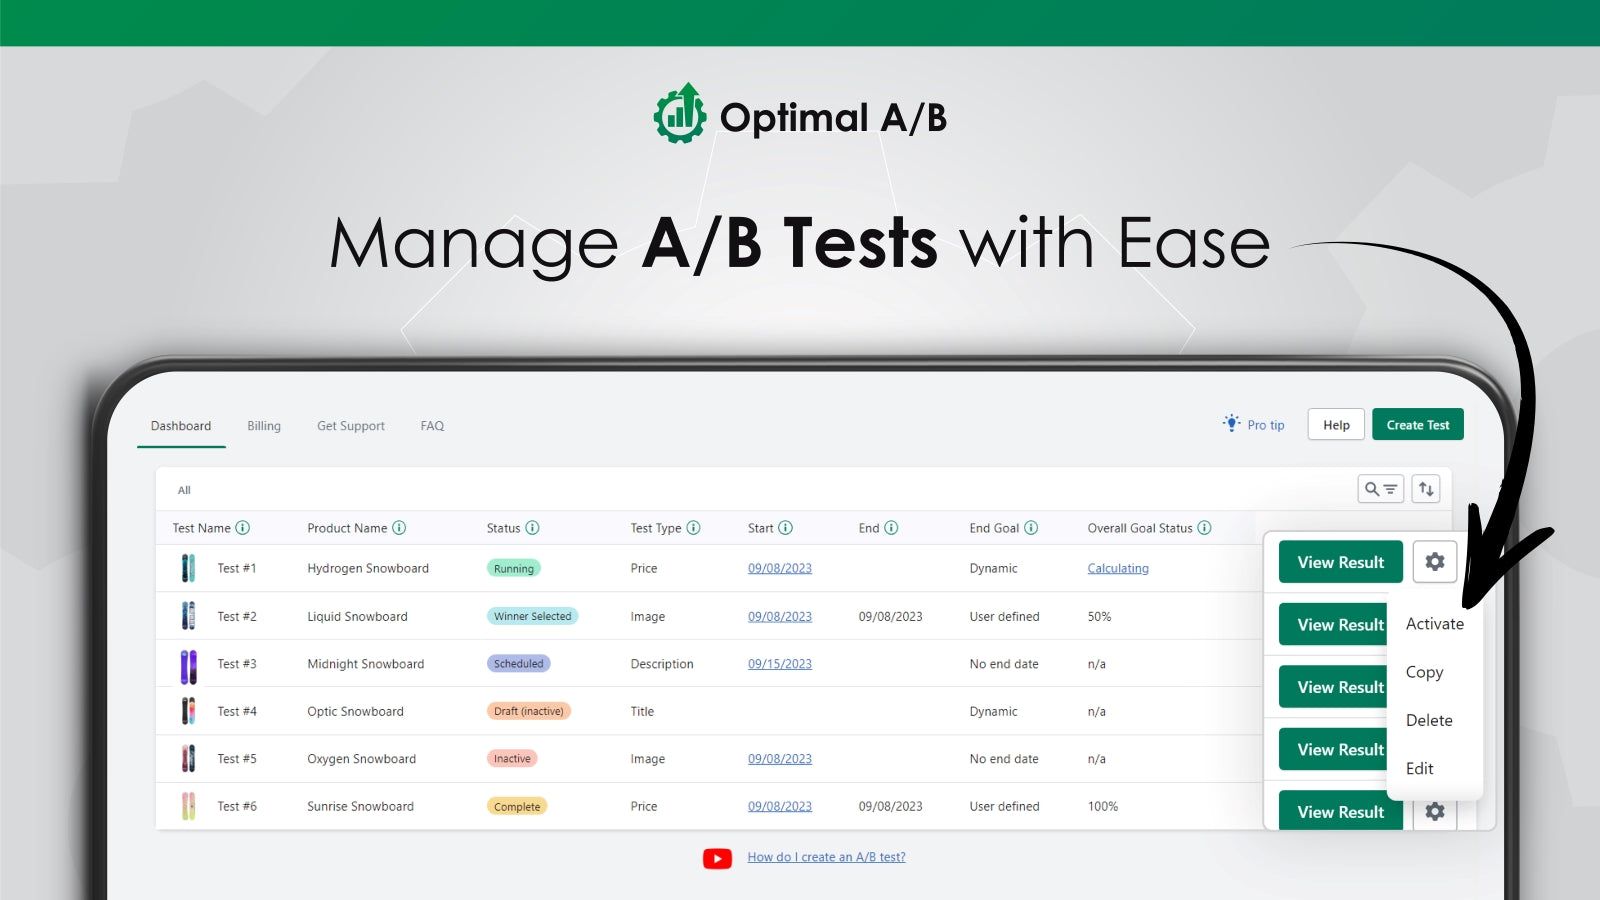 Optimal A/B allows you to manage A/B tests with ease